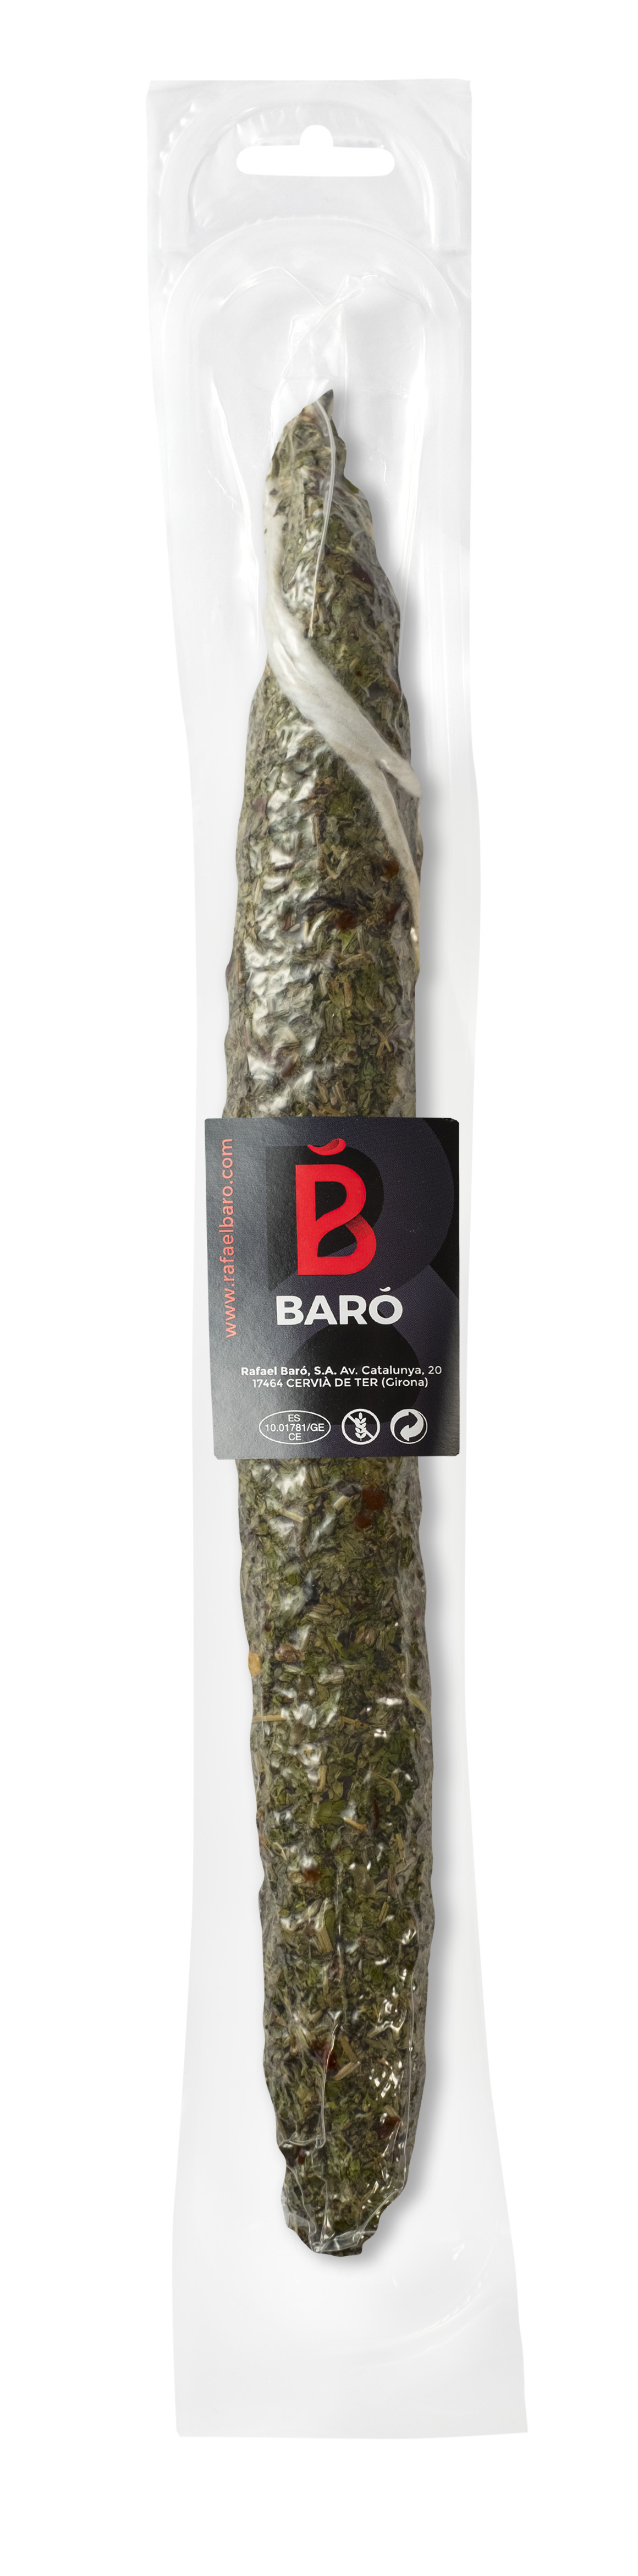 Baro Fuet Extra Sausage with Herbs (150g)